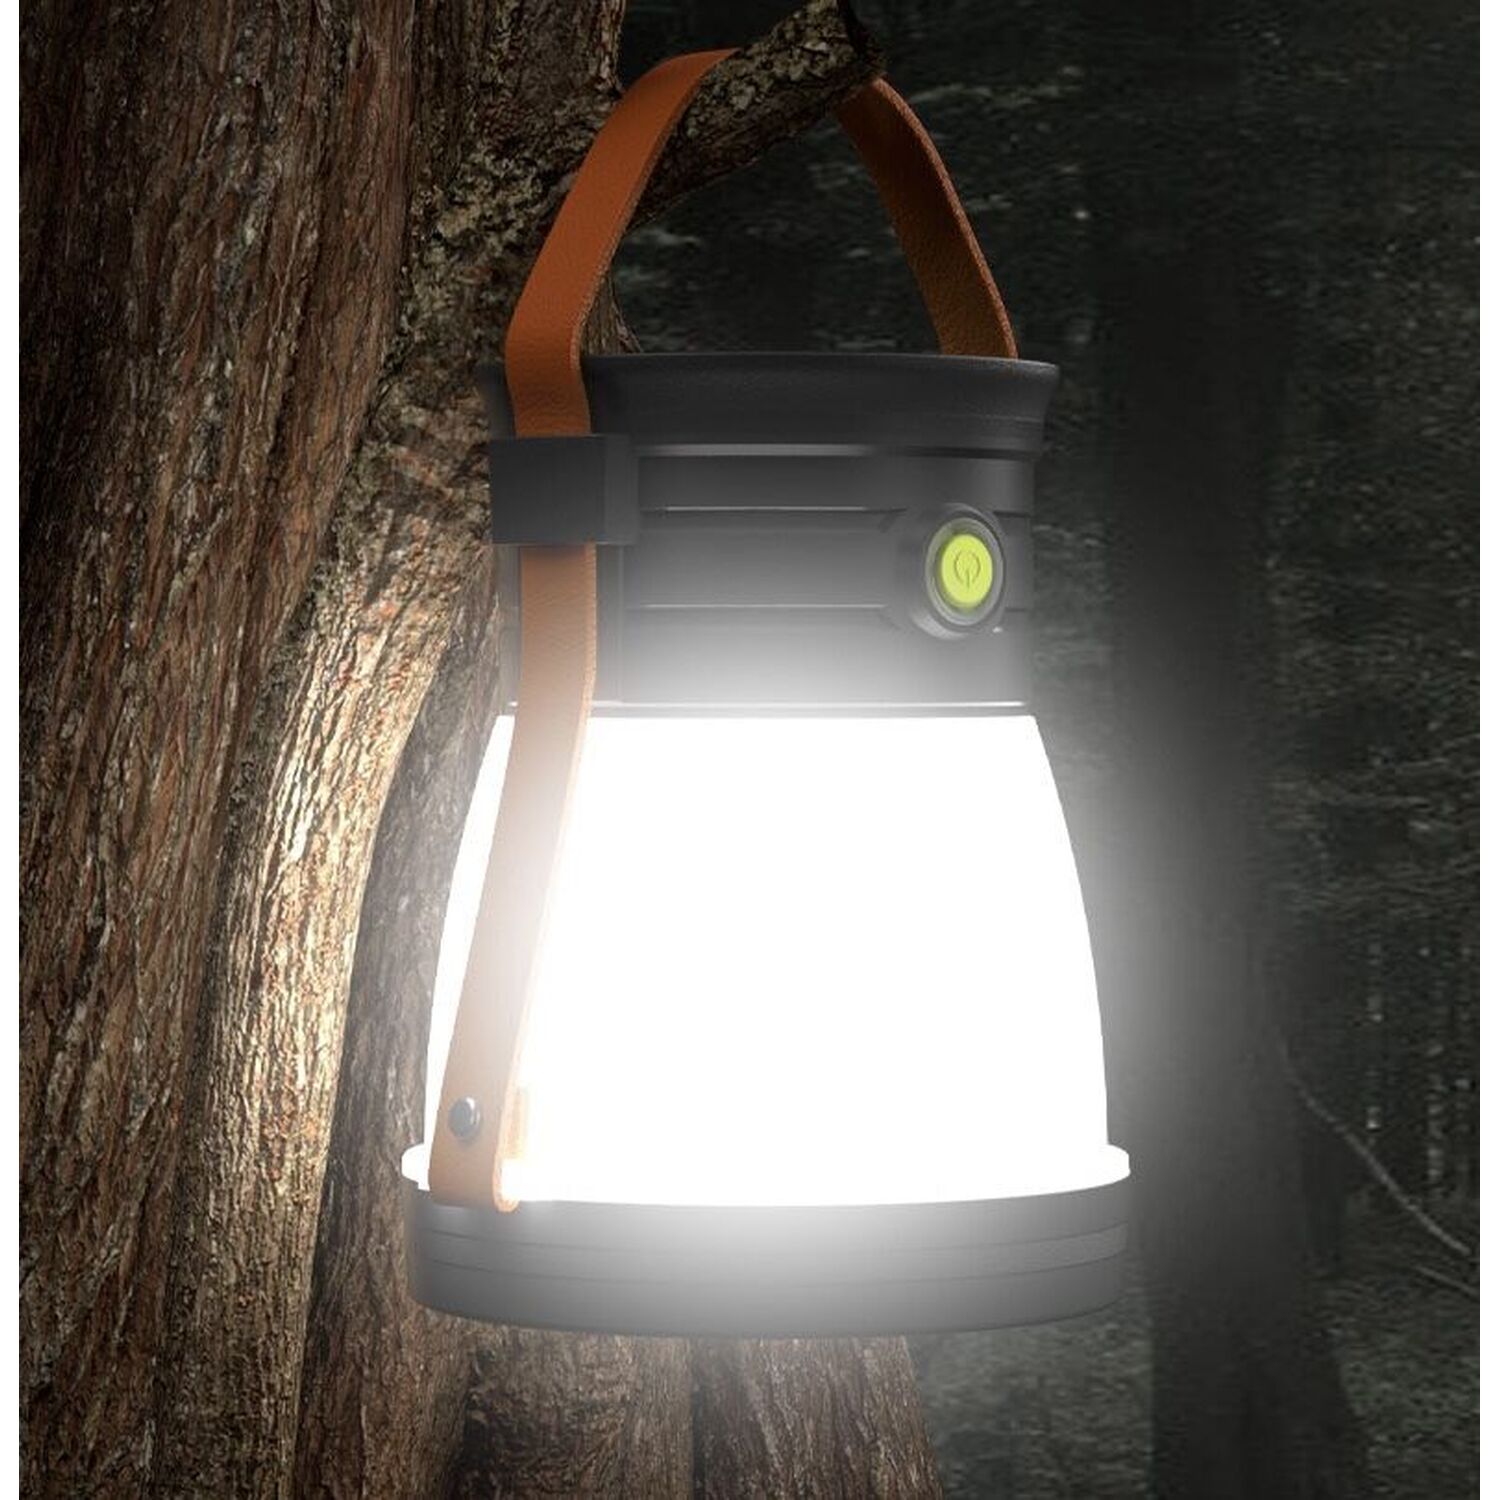 Rechargeable Camping Lantern with Strap - Black Image 4